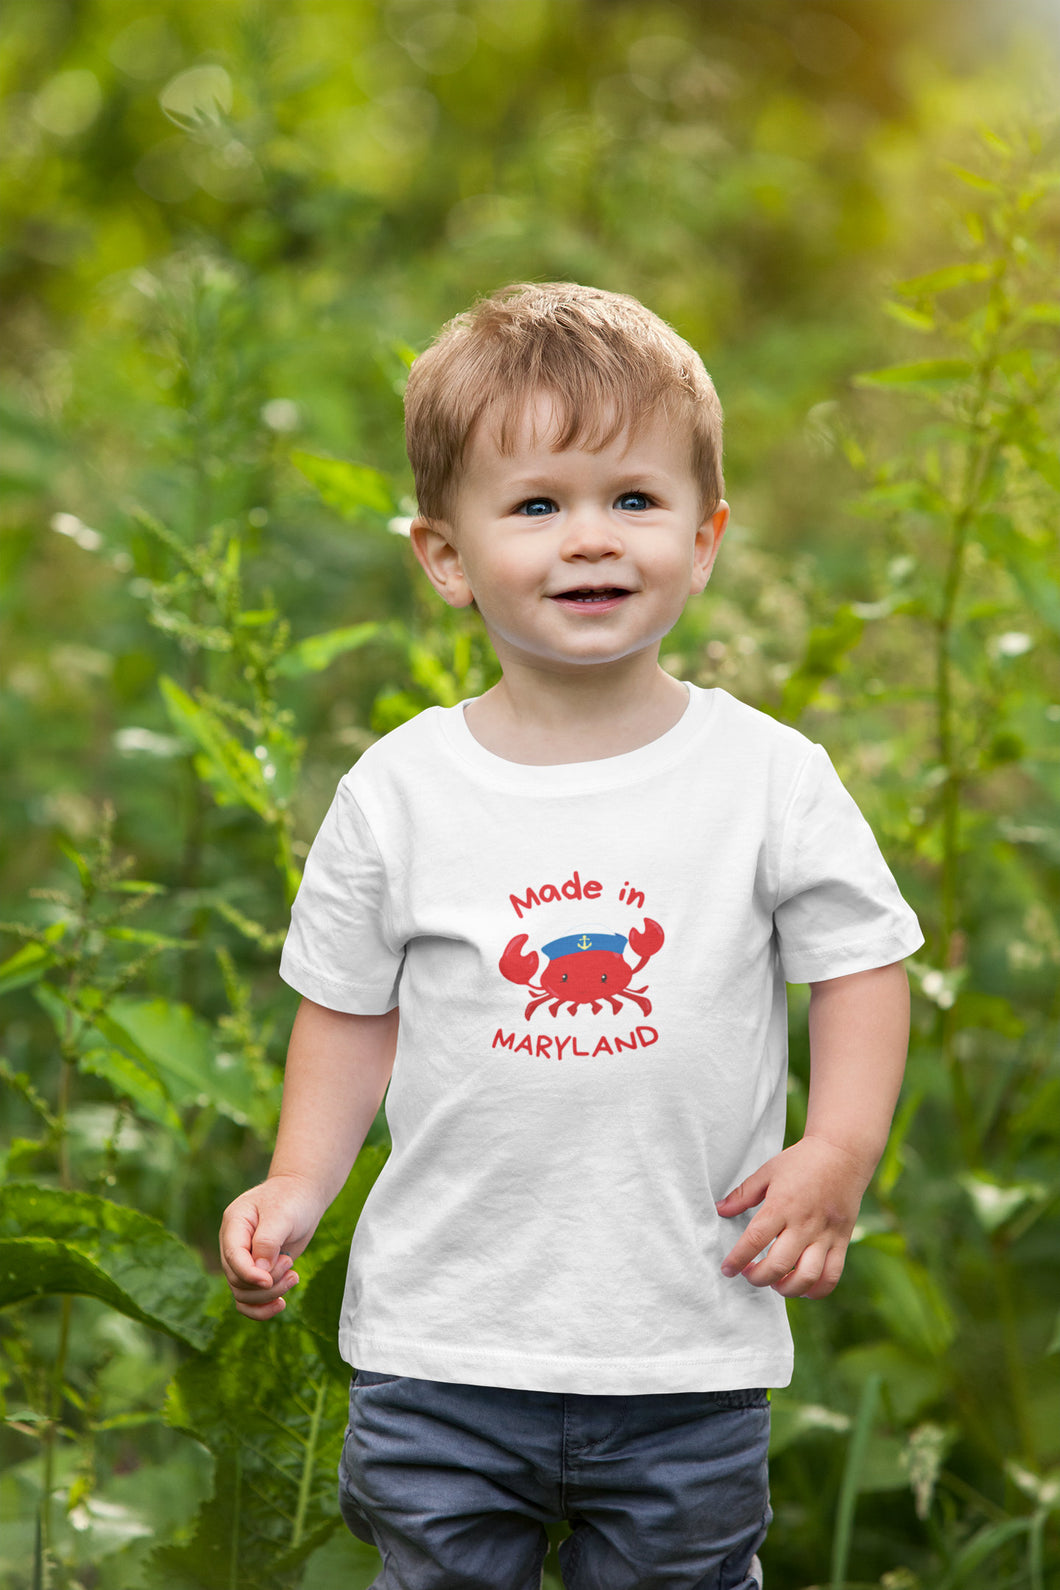 Maryland Crab Toddlers Shirt - Made in Maryland